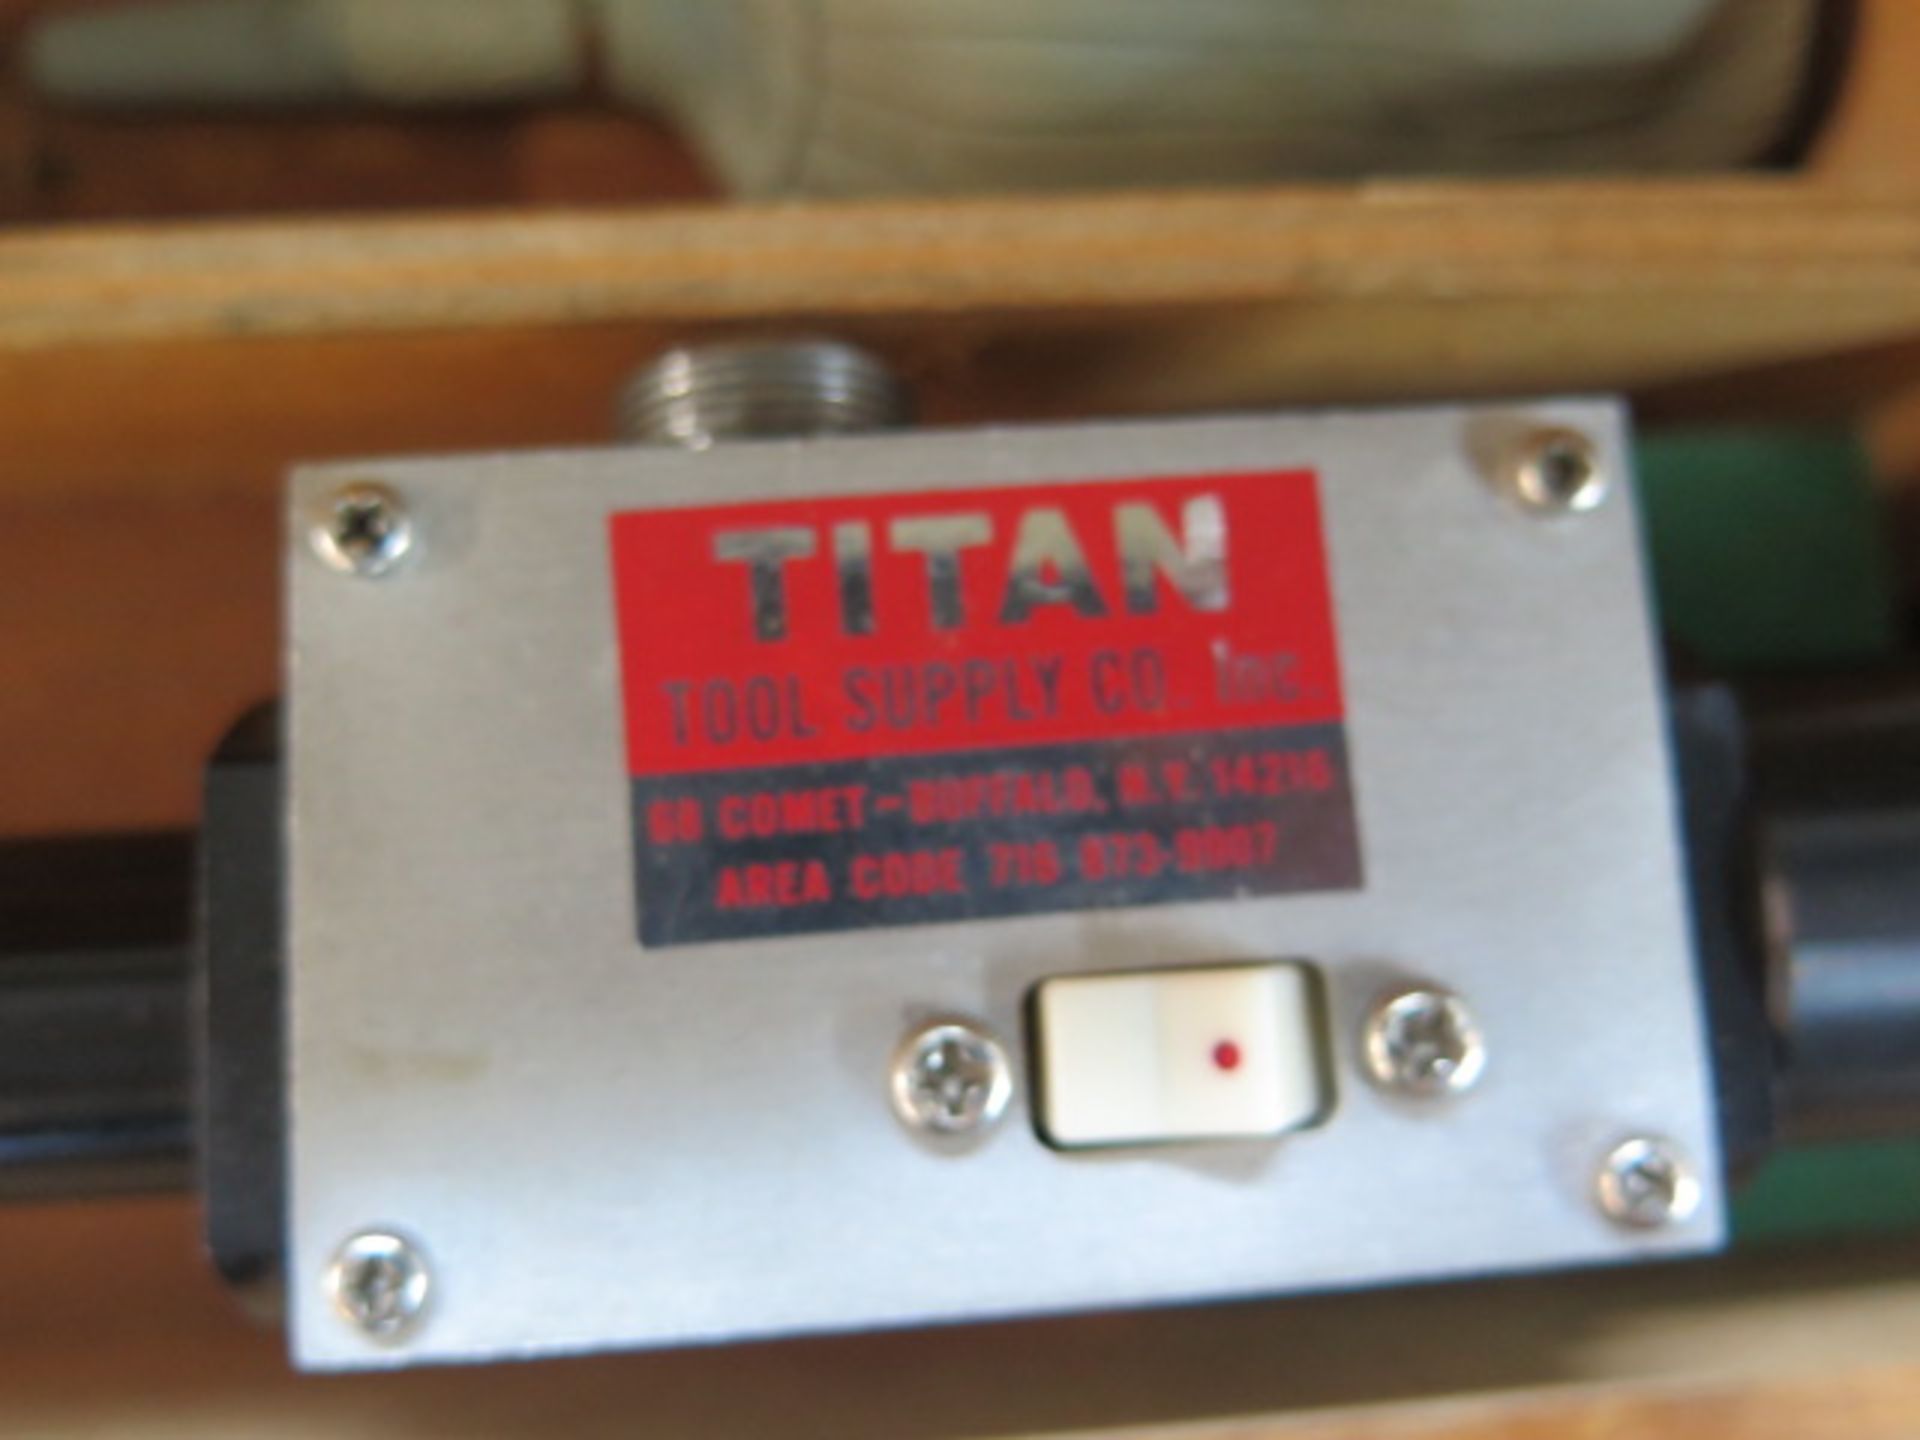 Titan Bore Scope (SOLD AS-IS - NO WARRANTY) - Image 6 of 6